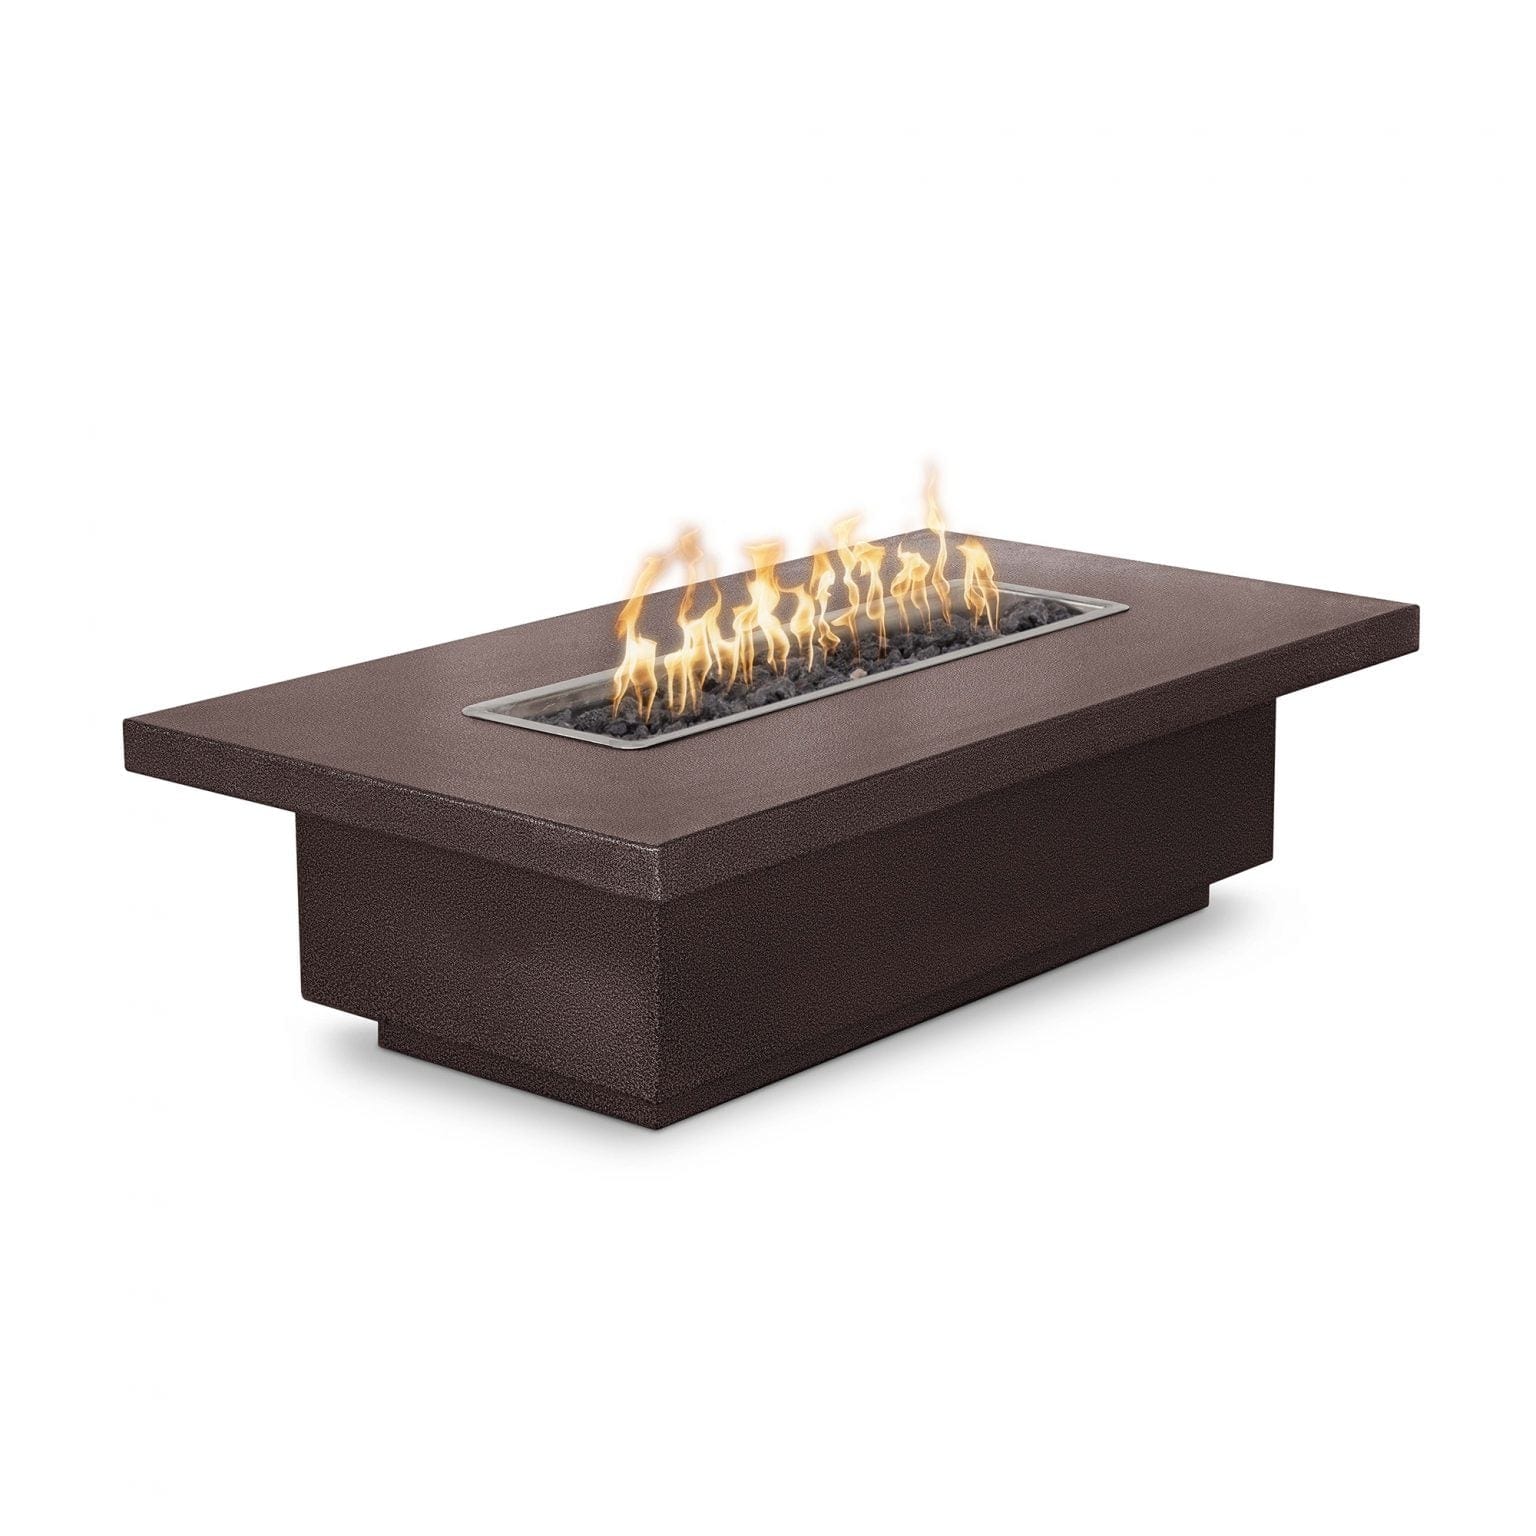 The Outdoor Plus Fire Pit 48" / Match Lit The Outdoor Plus Fremont Fire Pit - 15" Tall | Metal Powder Coat OPT-FRMPC4815